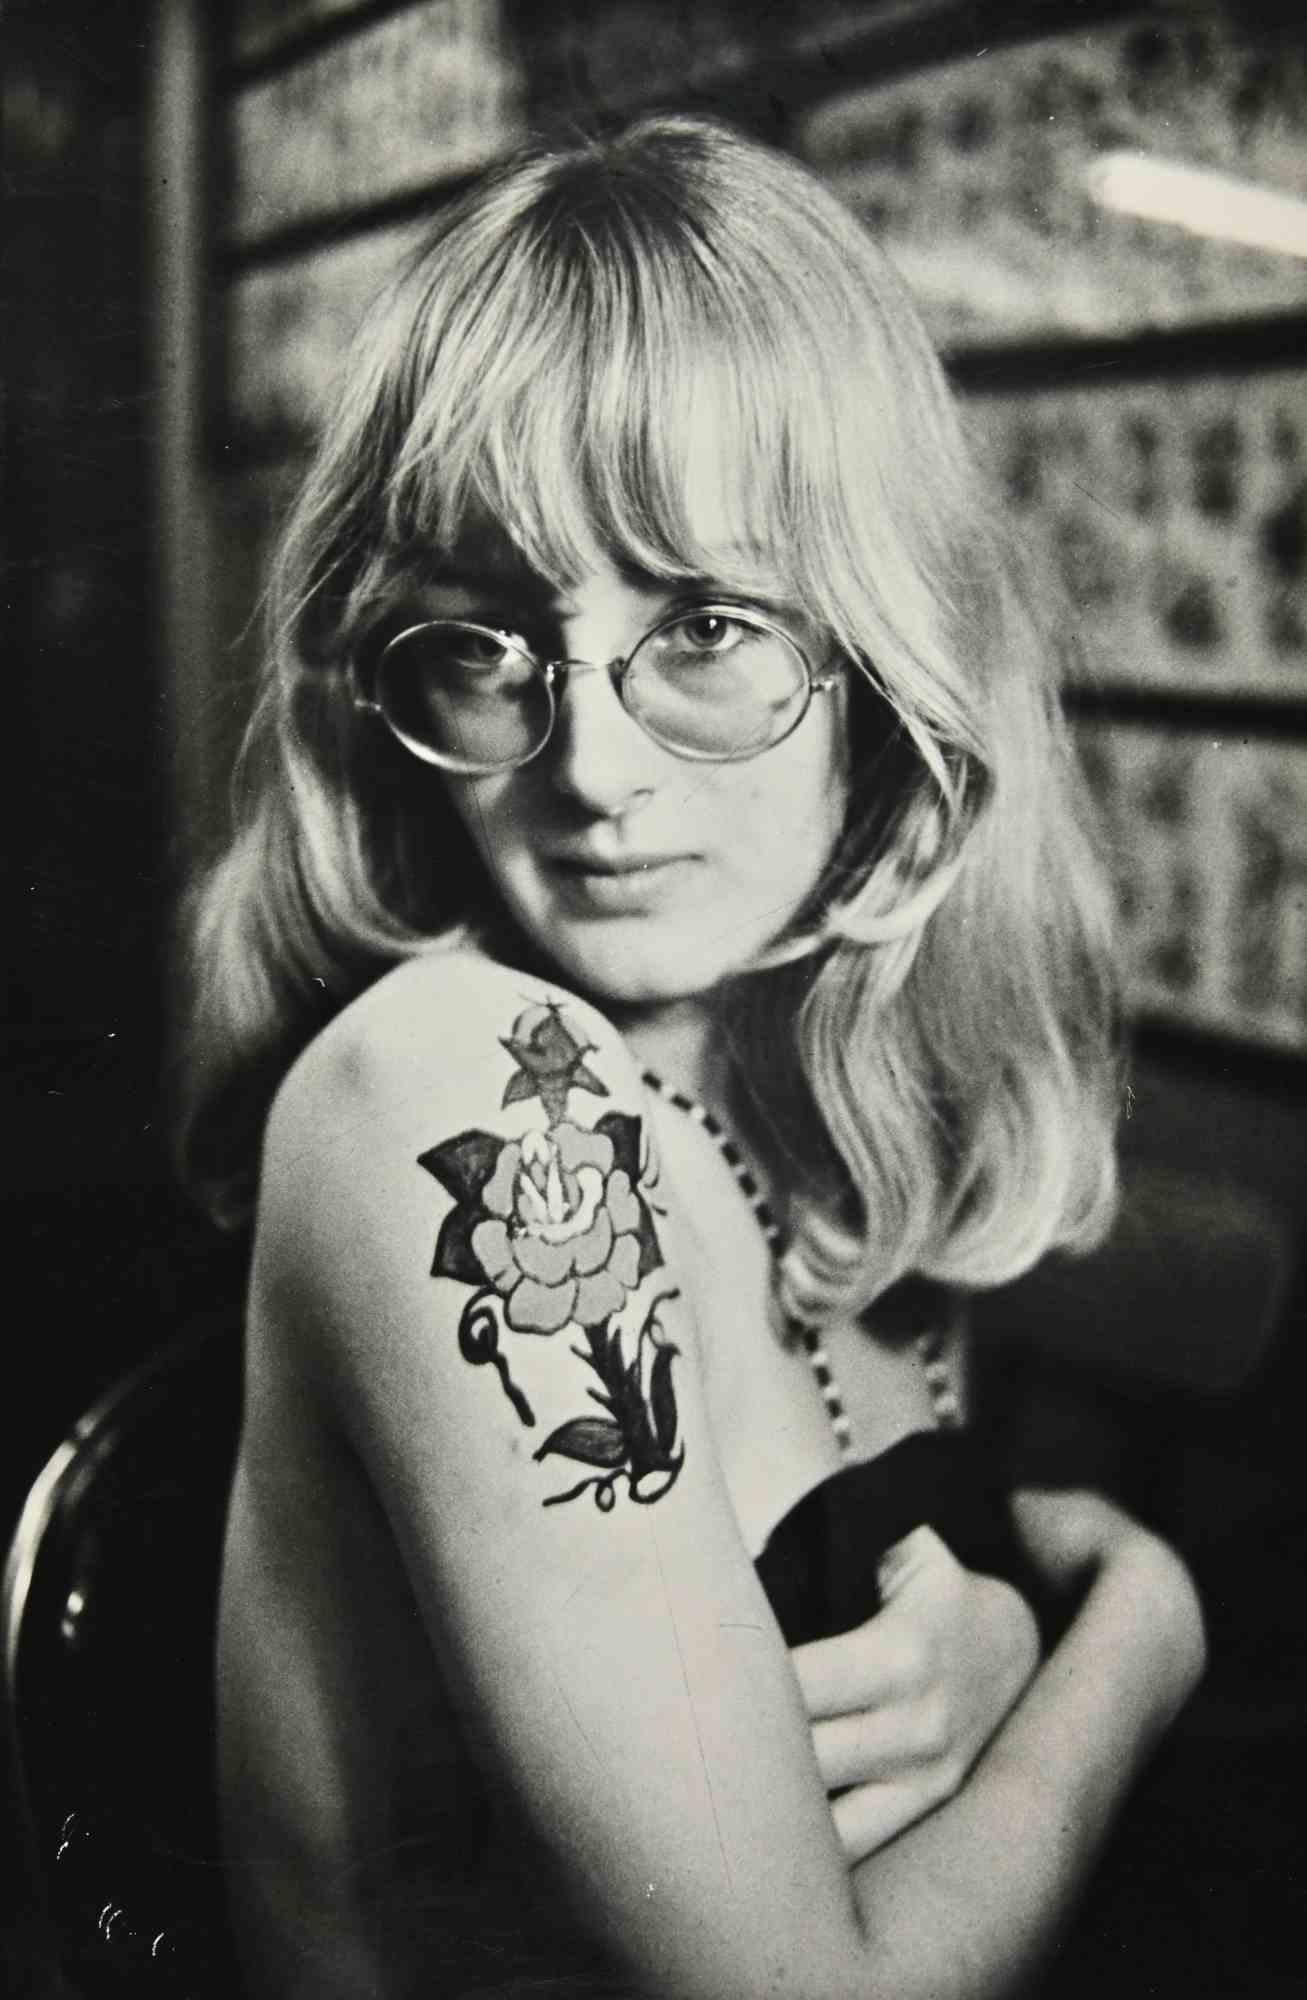 Unknown Figurative Photograph - Tattoo Girl - Vintage Photograph - 1960s